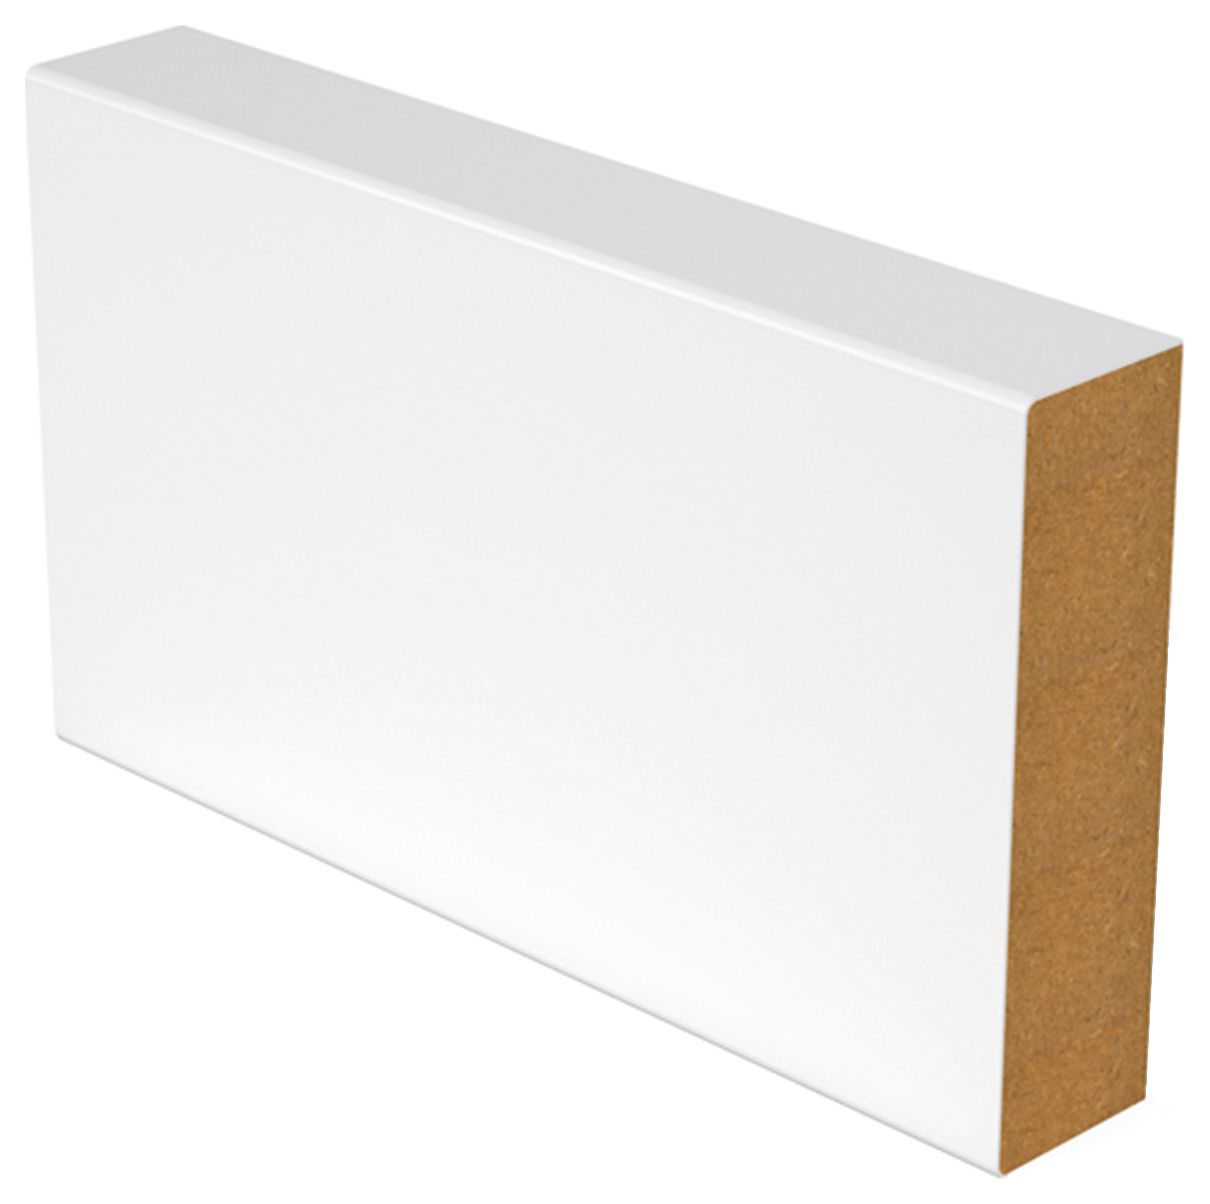 Image of Wickes Square Edge Skirting - 18 x 169 x 3660mm